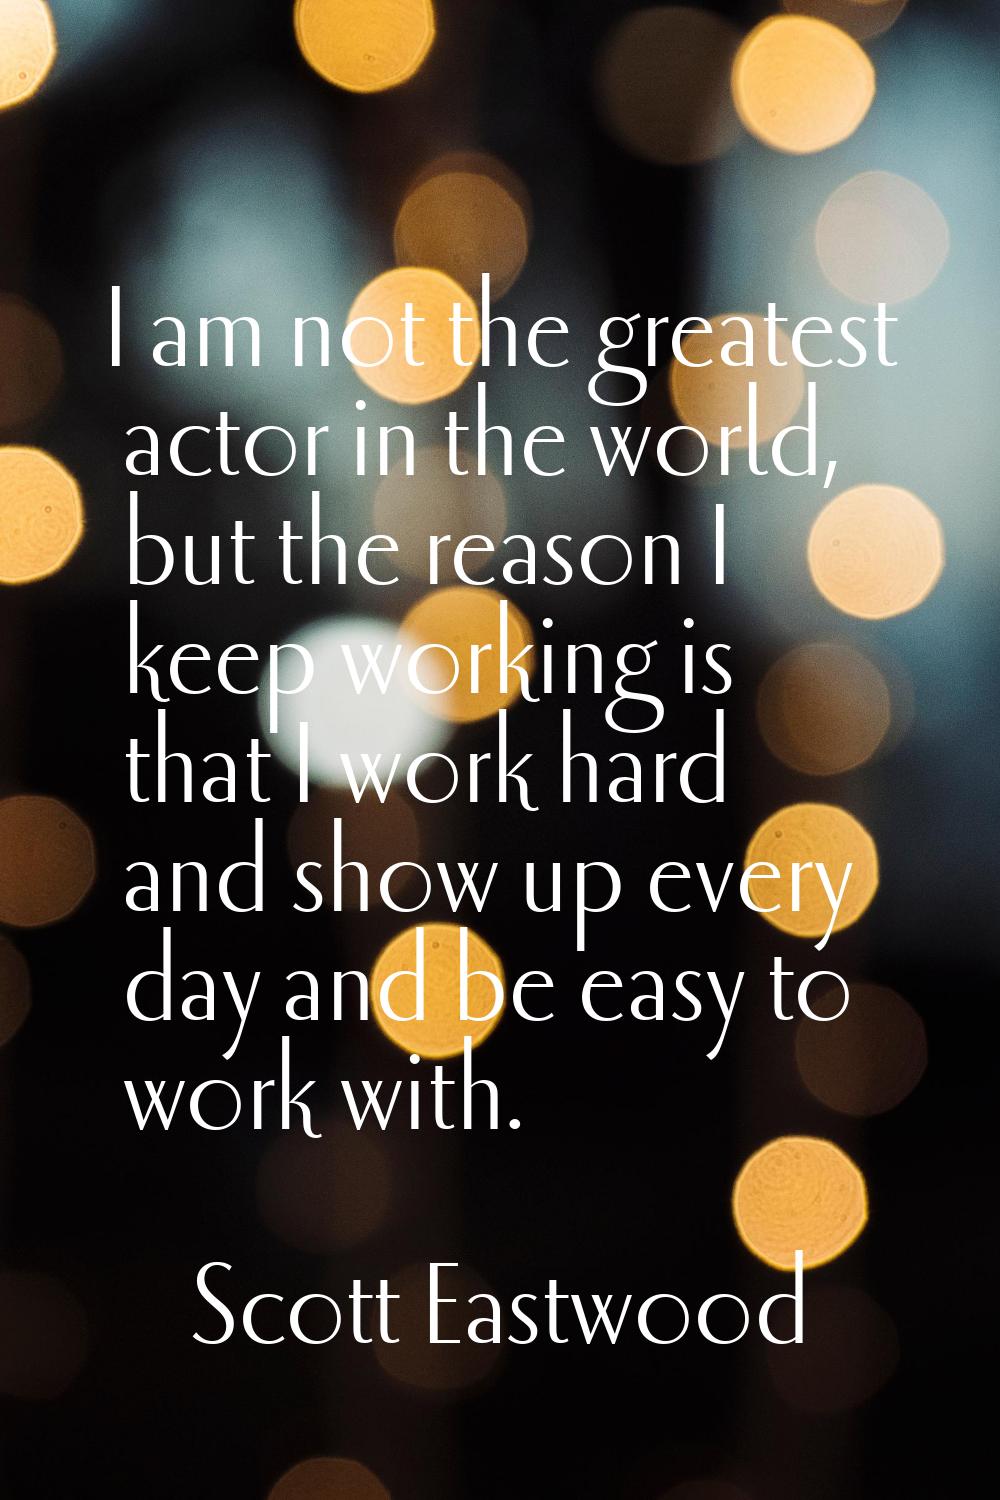 I am not the greatest actor in the world, but the reason I keep working is that I work hard and sho